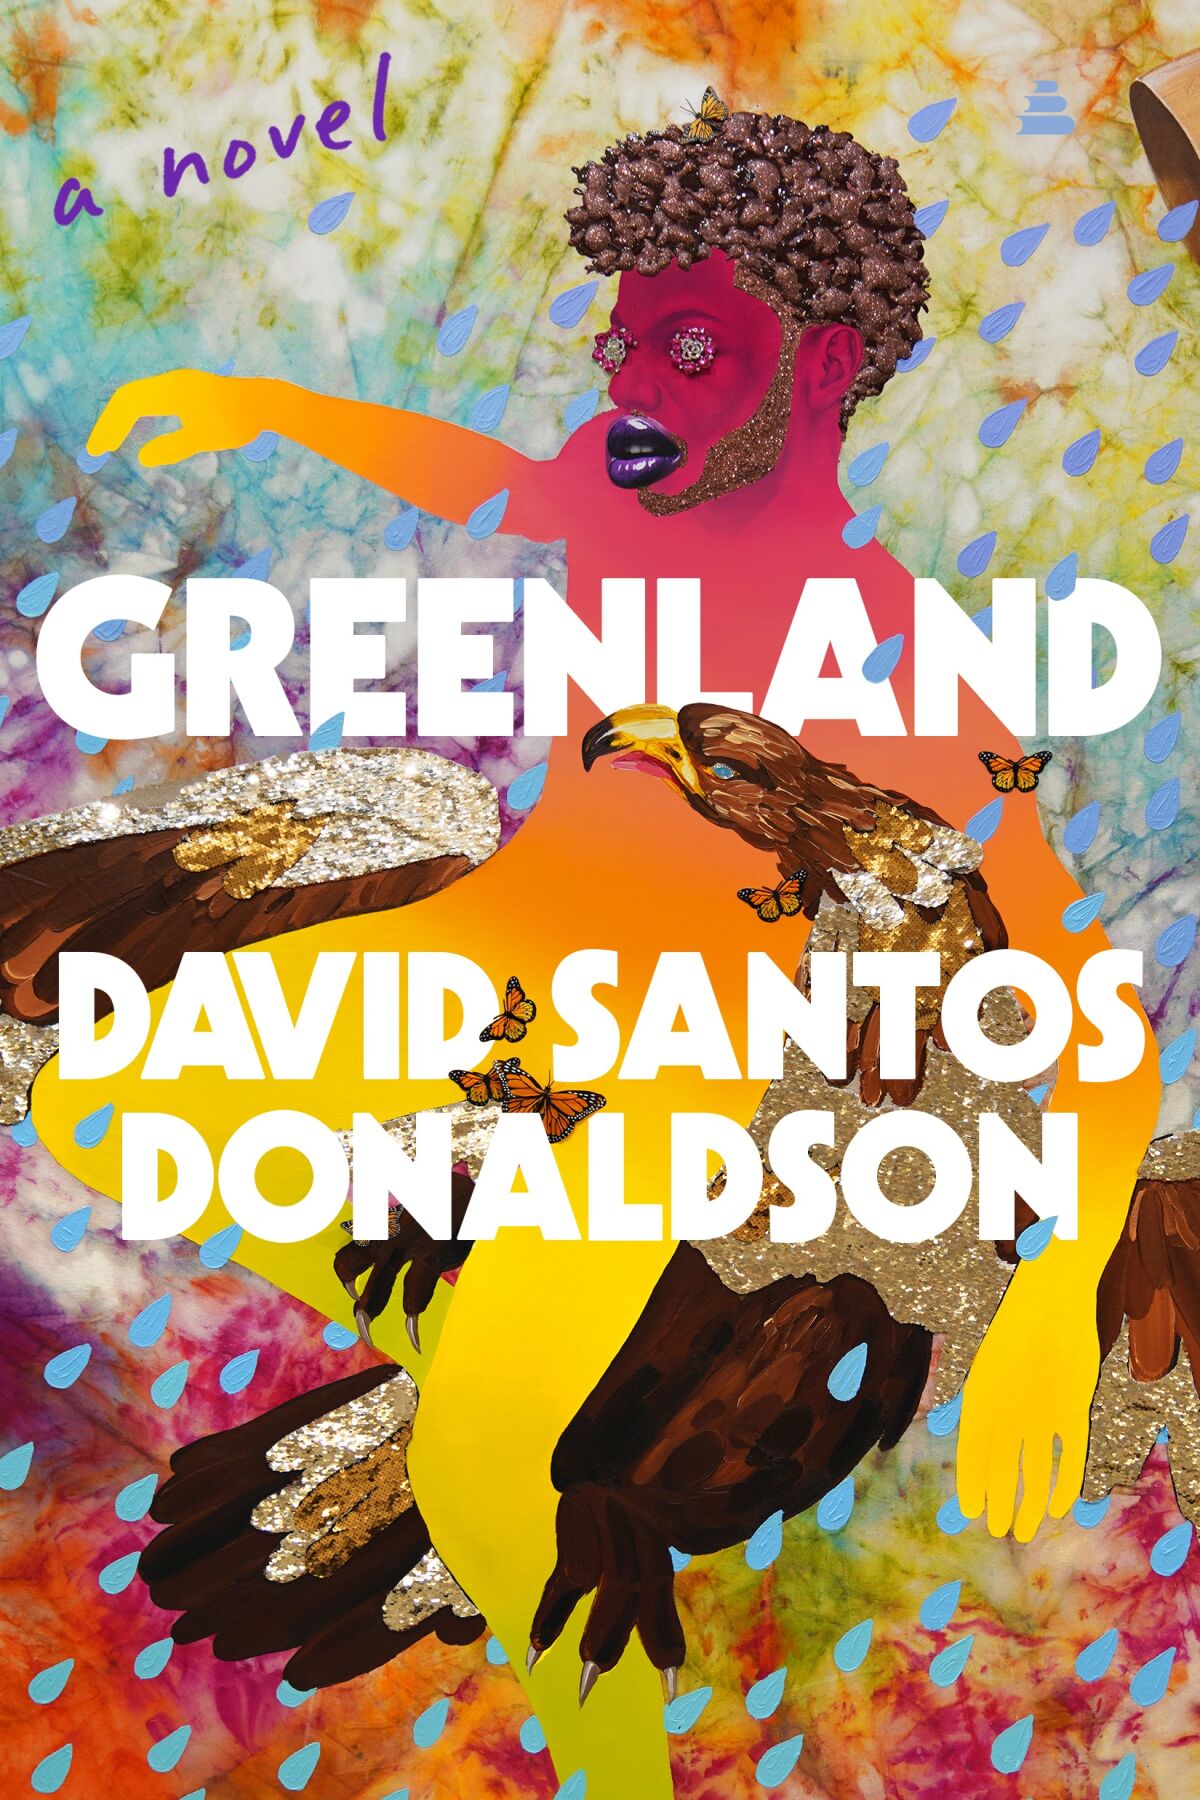 The book cover of "Greenland" by David Santos Donaldson